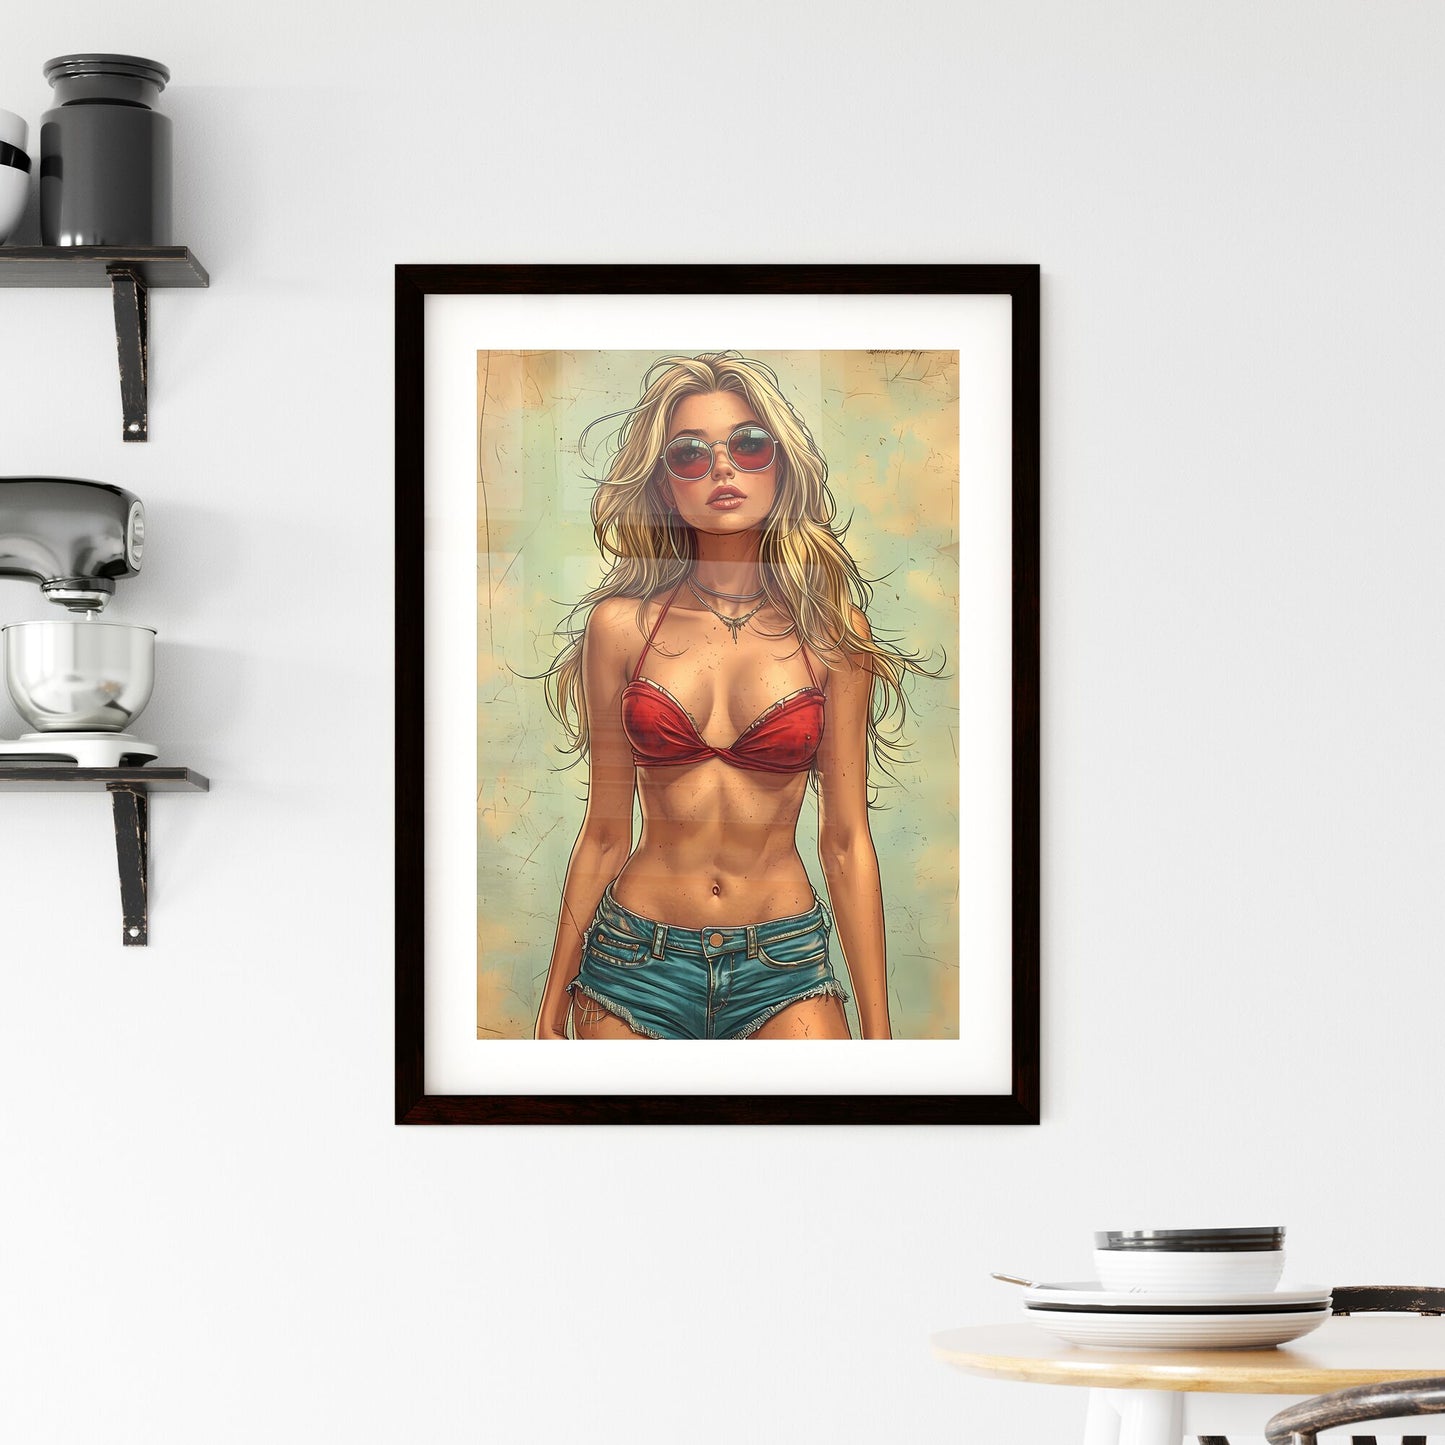 Vintage hipster woman - Art print of a woman wearing sunglasses and a garment top Default Title